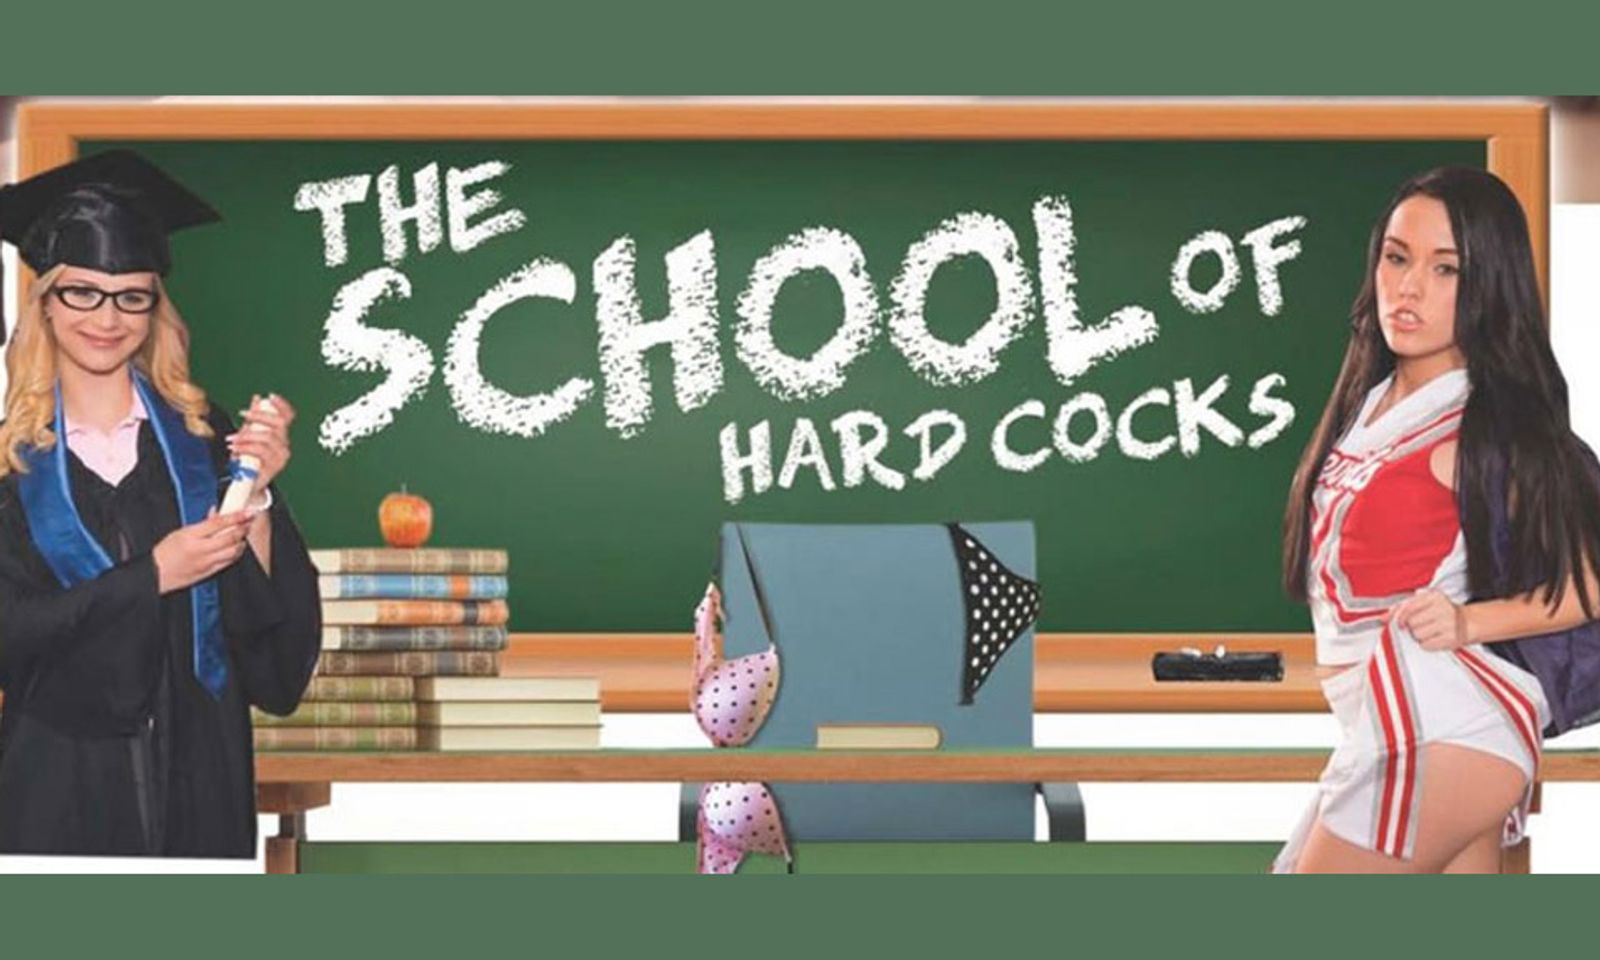 Score Sends Ingénues to 'The School of Hard Cocks'